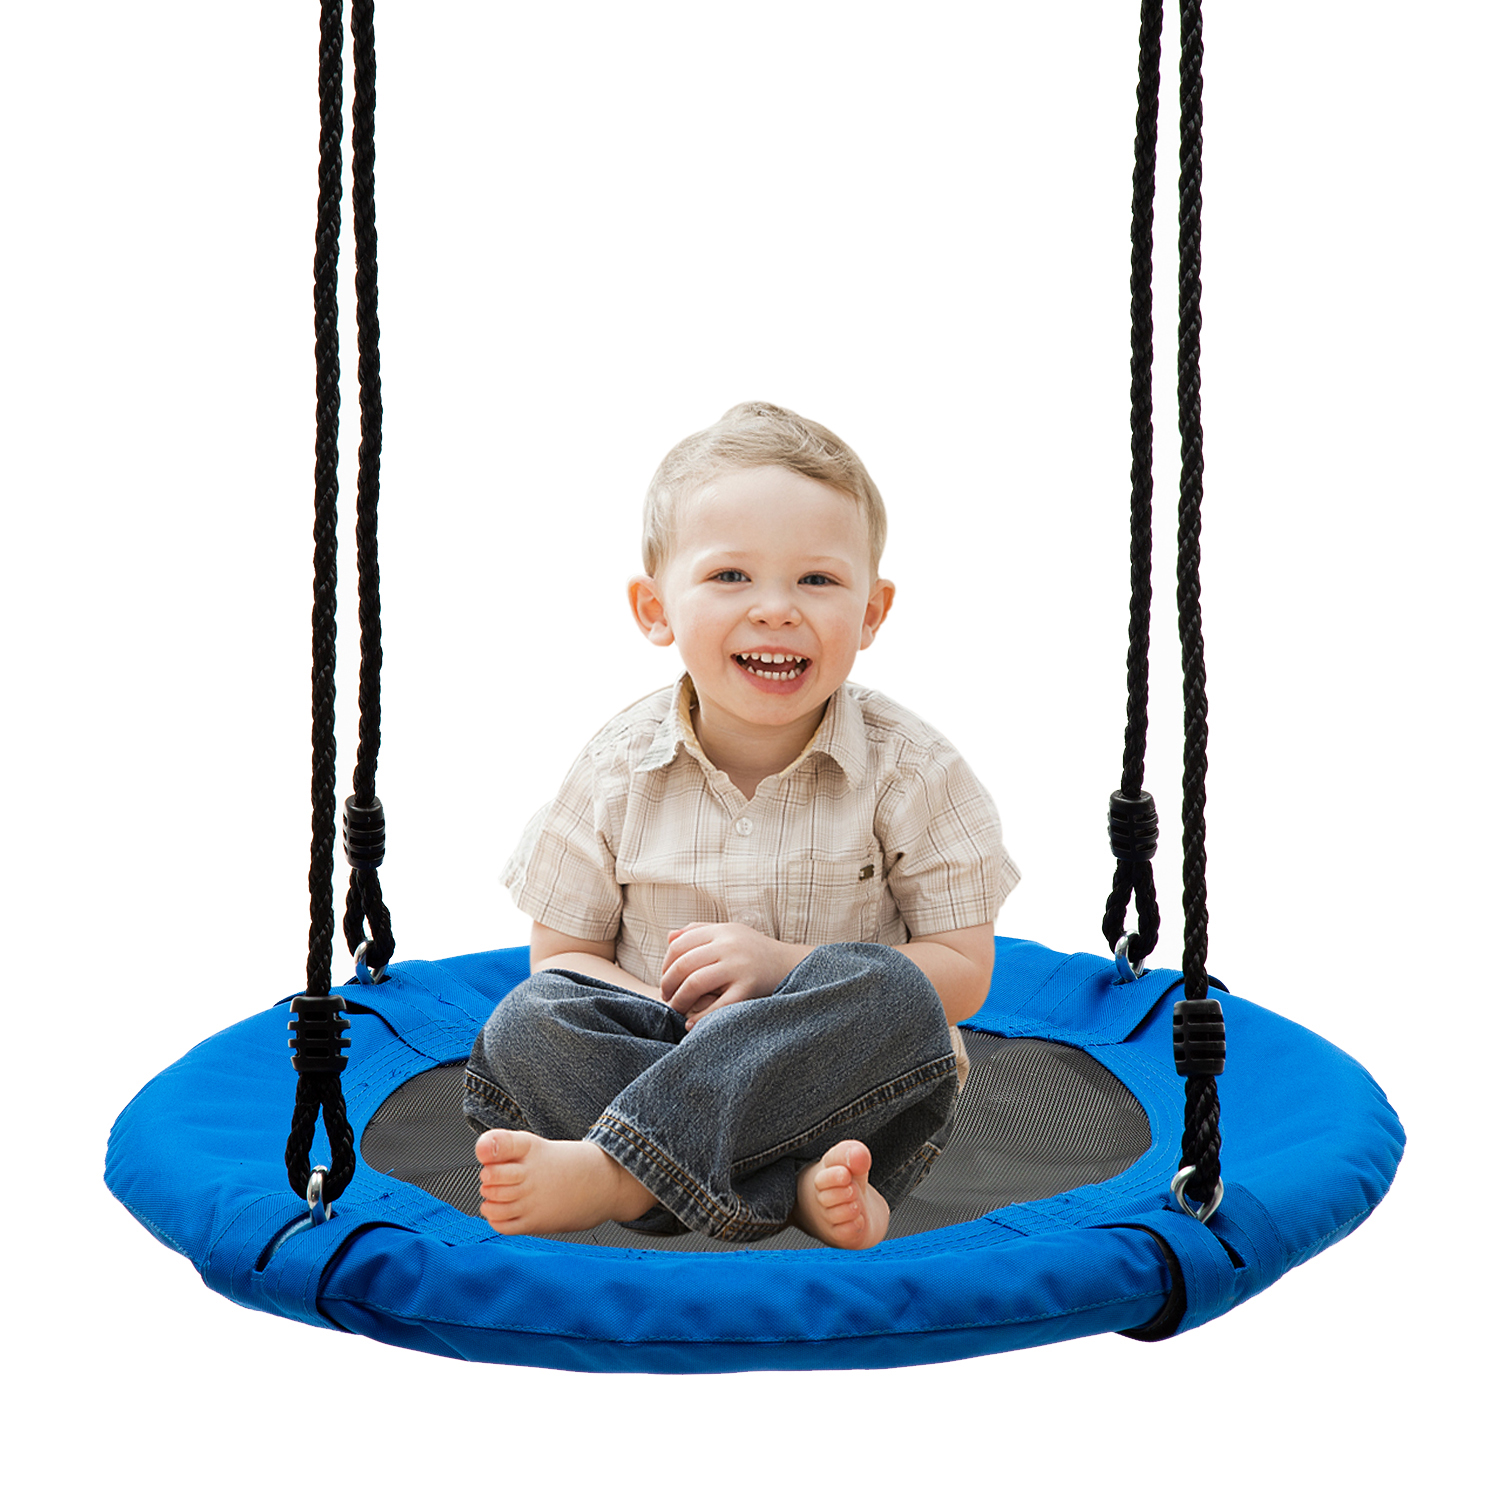 24 "dish-shaped hammock chair swing multi-seat platform cushion indoor and outdoor children's circular hanging sky swing lounge chair park - image 1 of 3